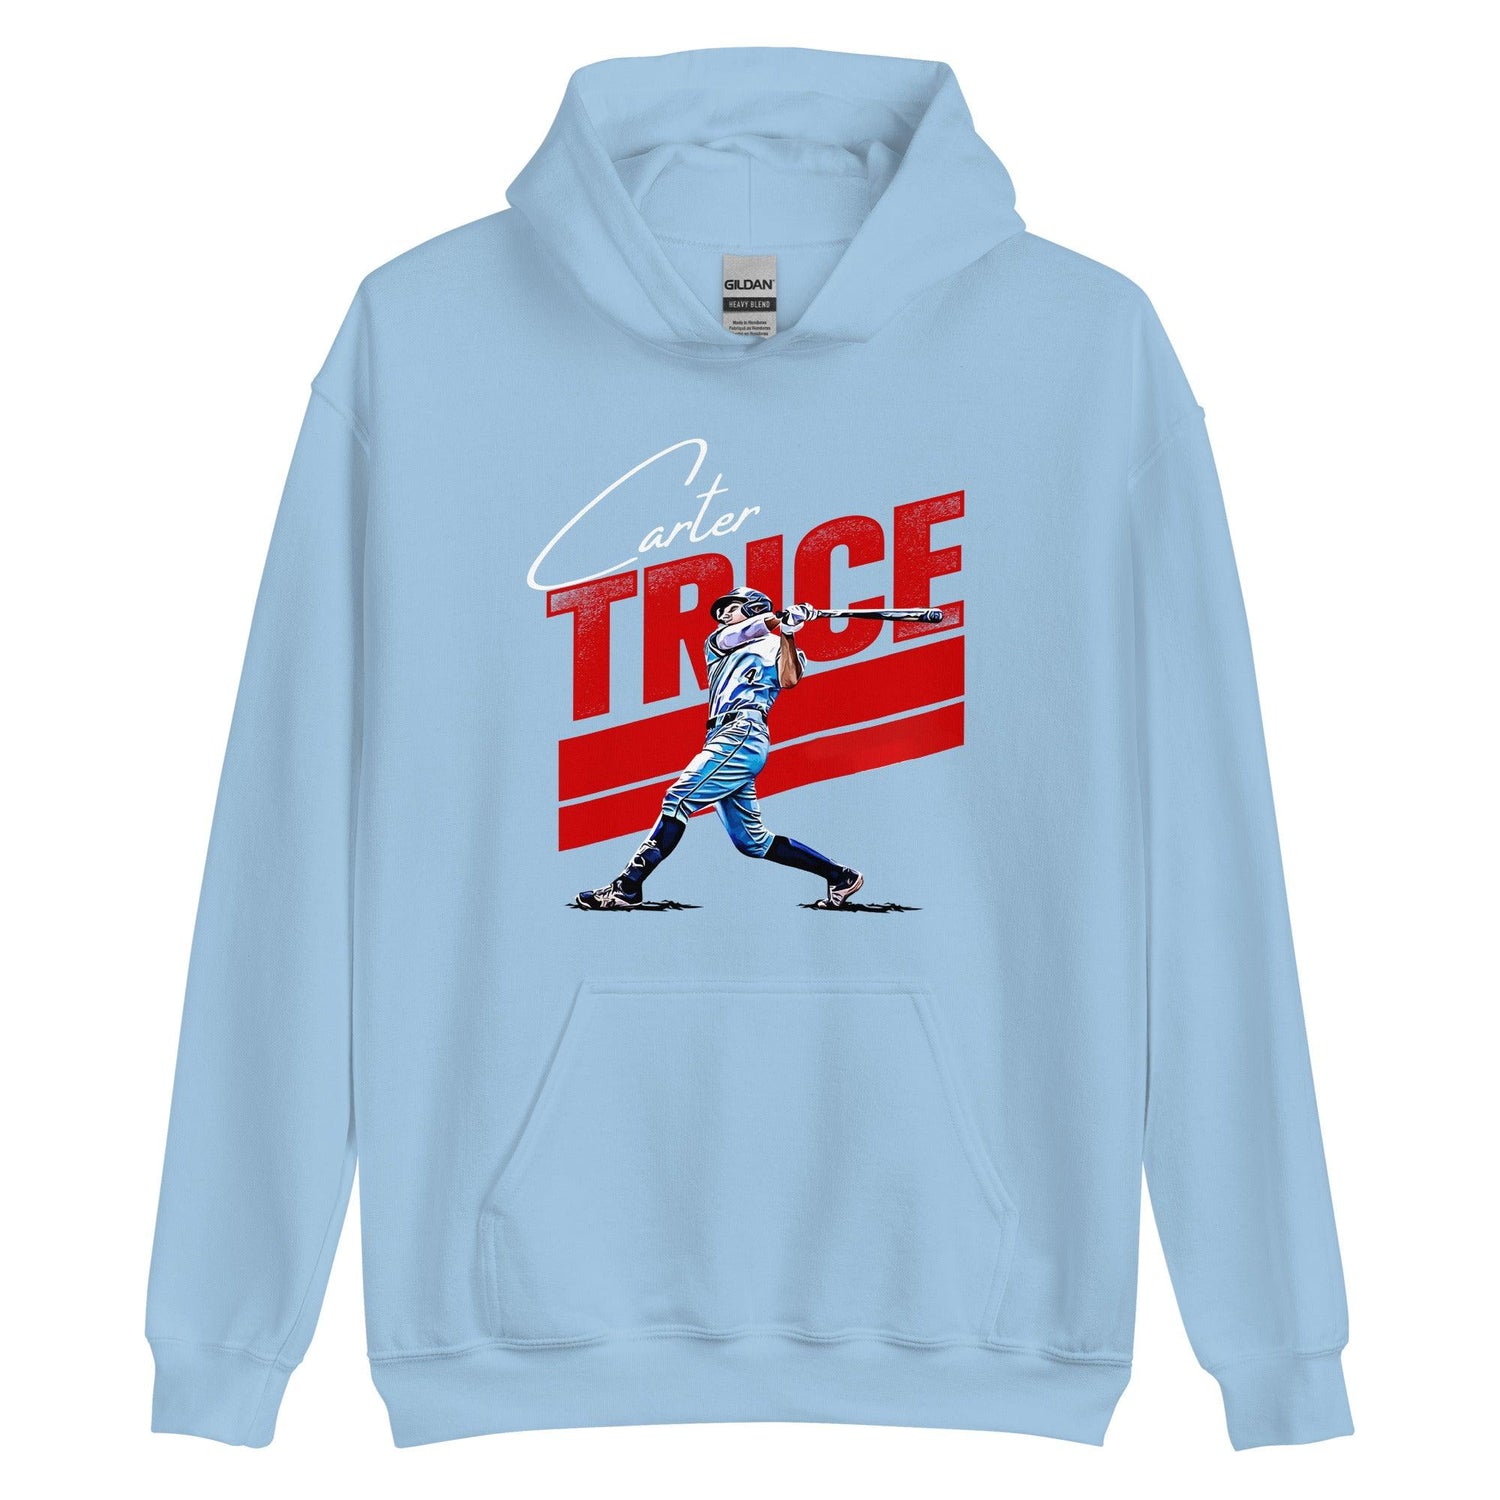 Carter Trice “Essential” Hoodie - Fan Arch